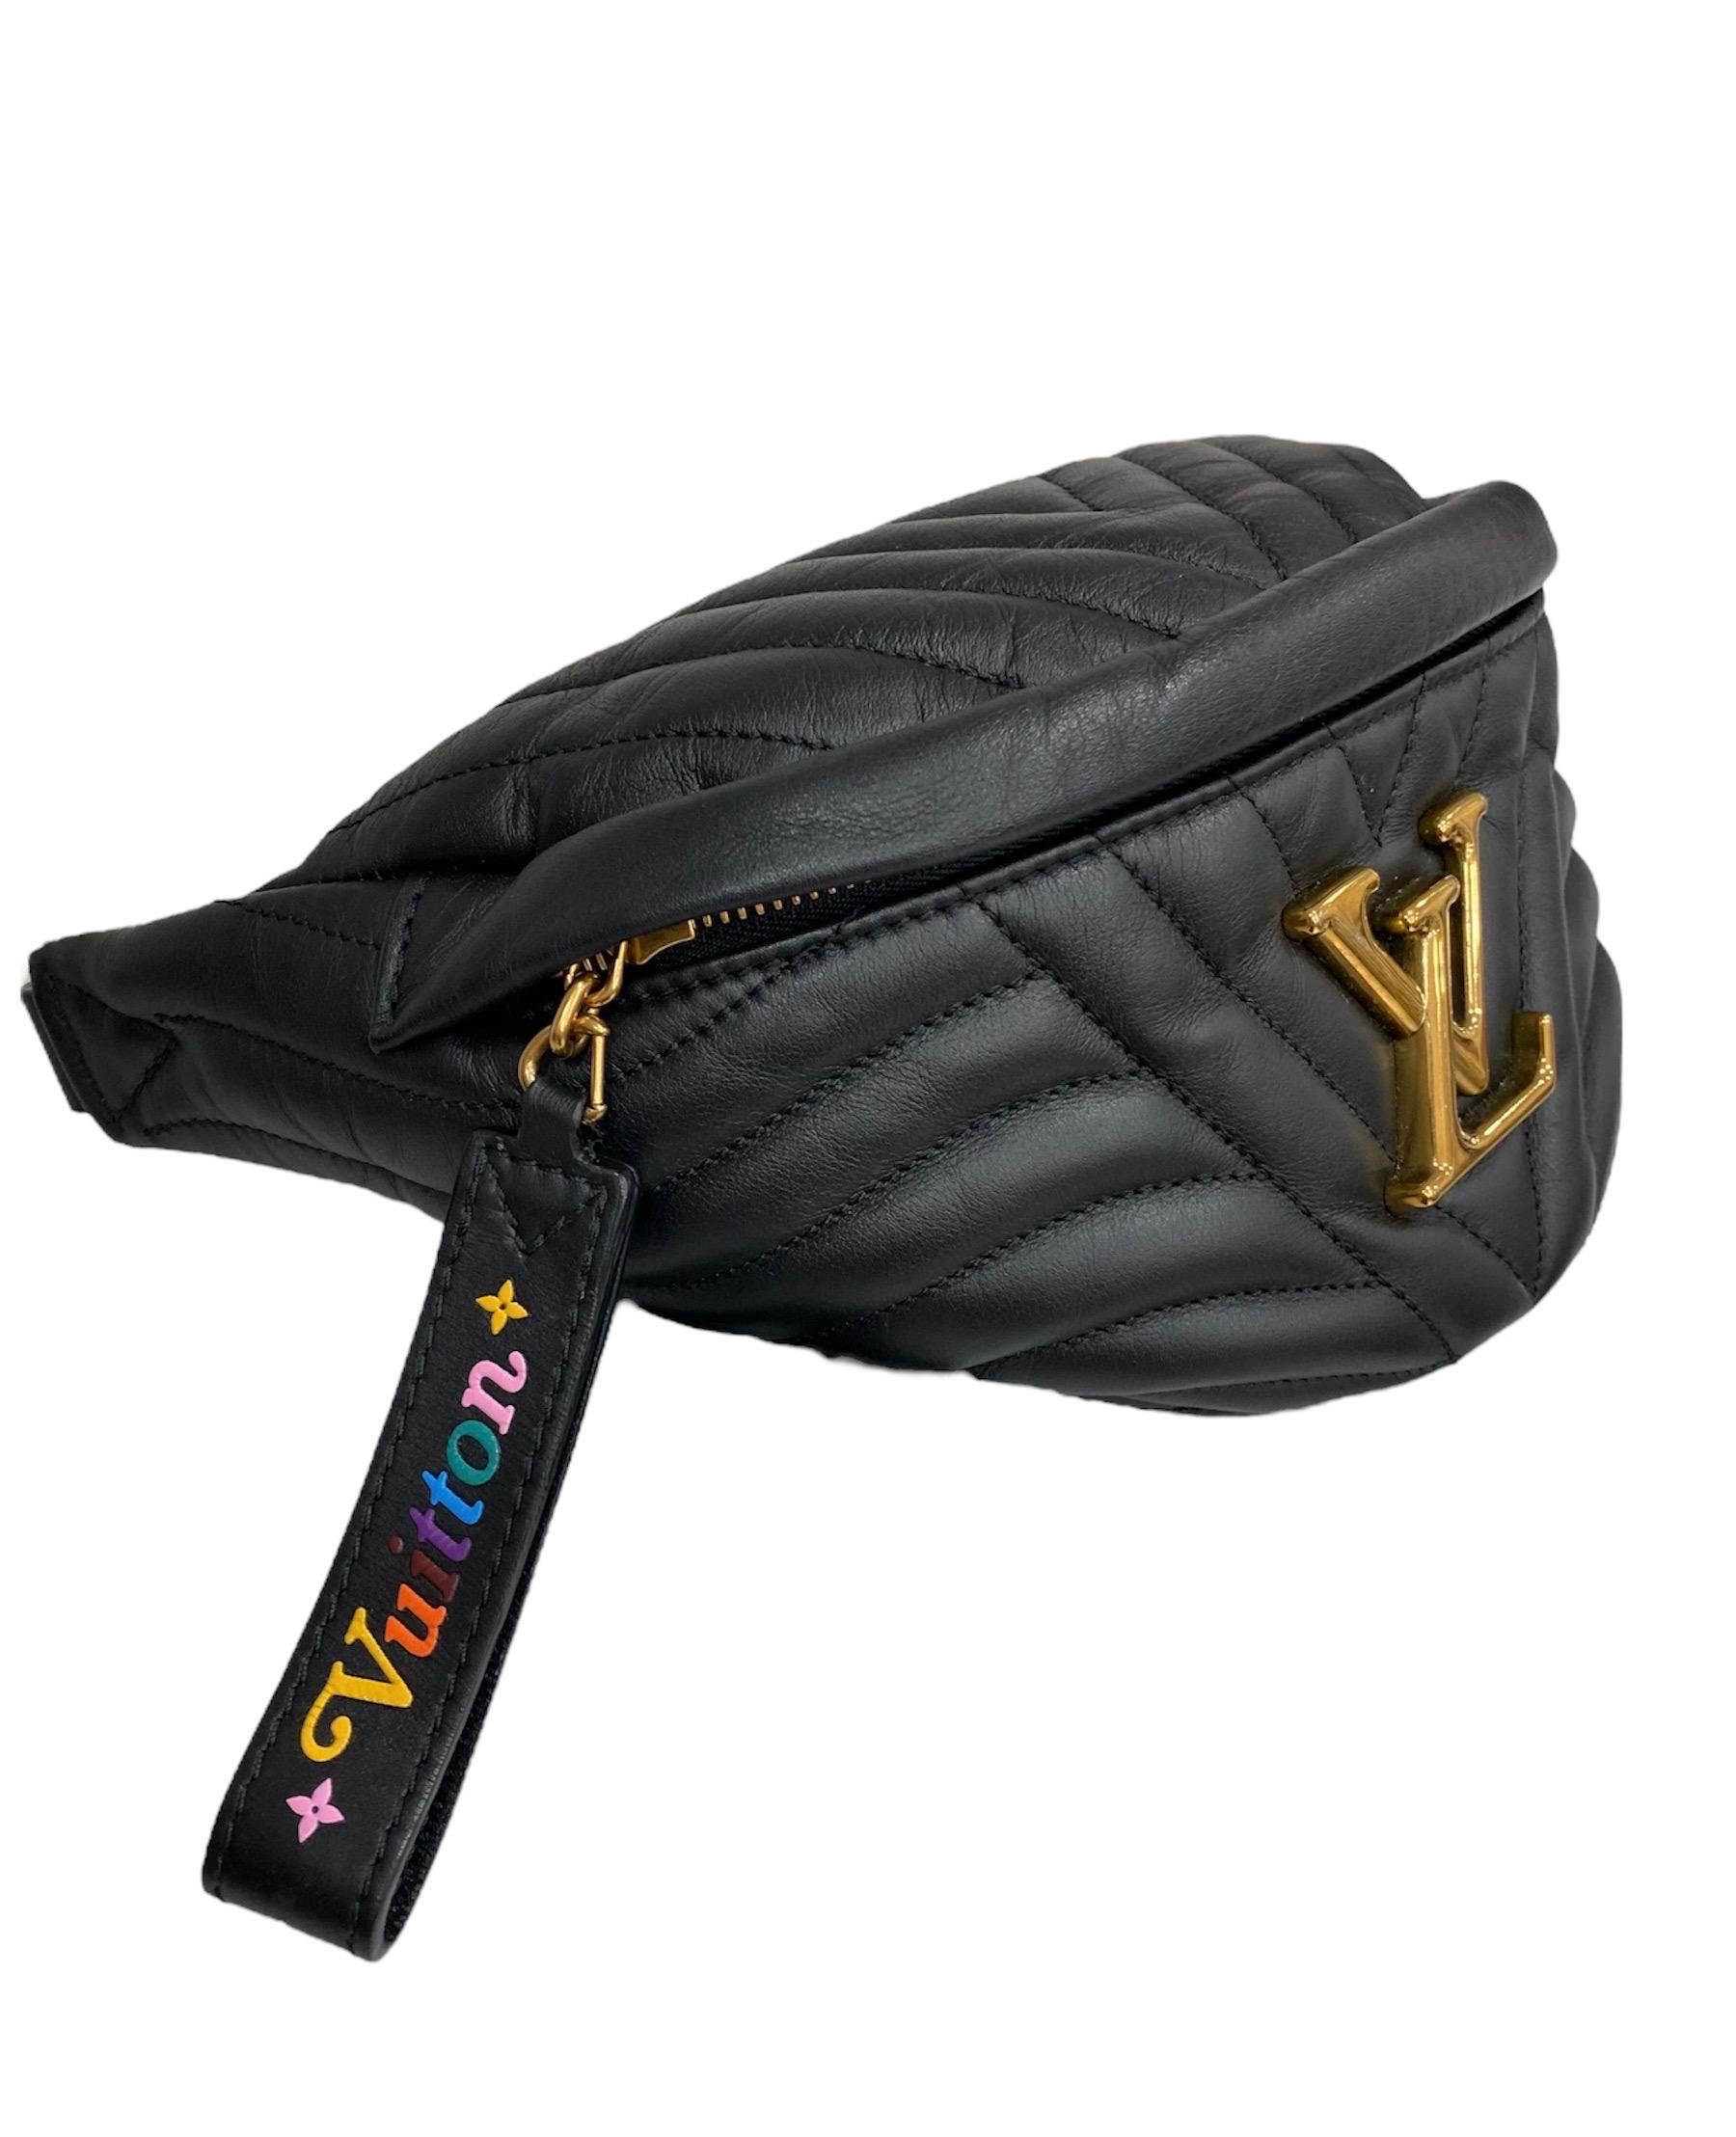 Louis Vuitton belt bag, New Wave model, made of black quilted leather and gold hardware.

Front zip closure. The zip puller has multicolor letters.

Equipped with adjustable belt to be able to wear it on the chest or waist.

Internally lined in